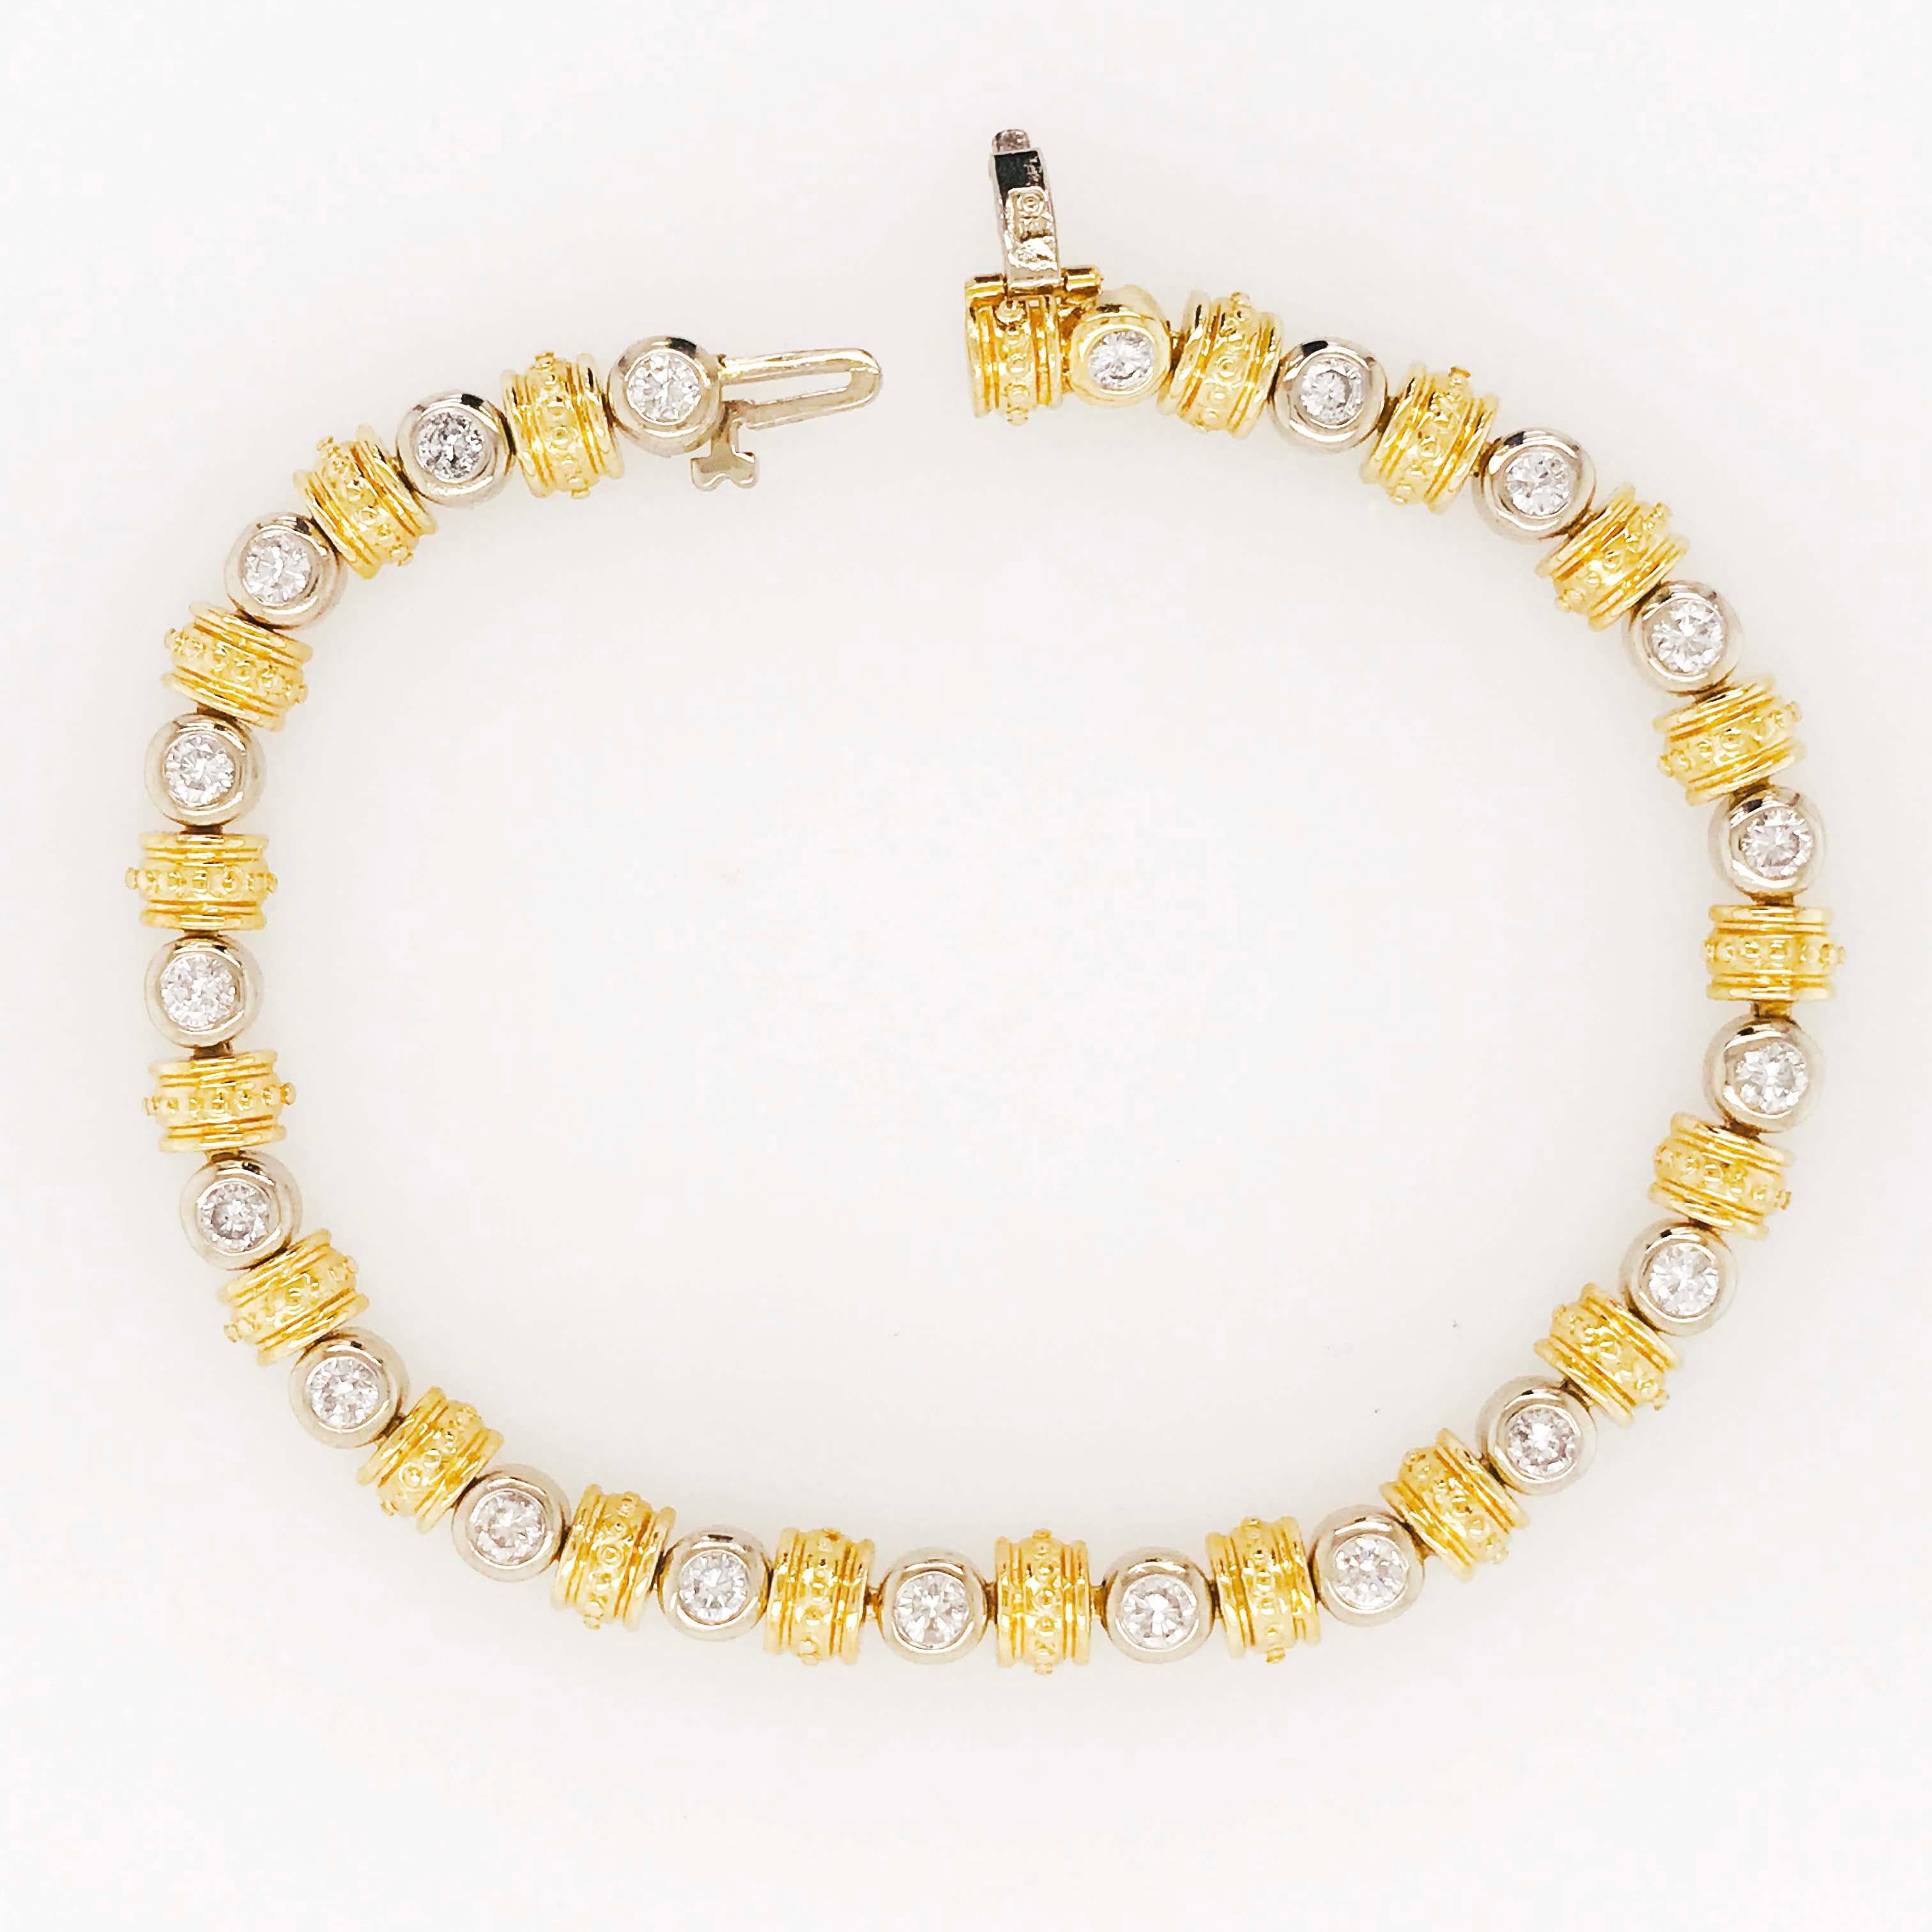 This unique estate bracelet has beautiful round brilliant cut diamonds set in 14 karat white gold bezels.  There is a total diamond weight of 2.80 carats! Between the bezels, are 14kt yellow gold half rondels that have beading on them.  The design